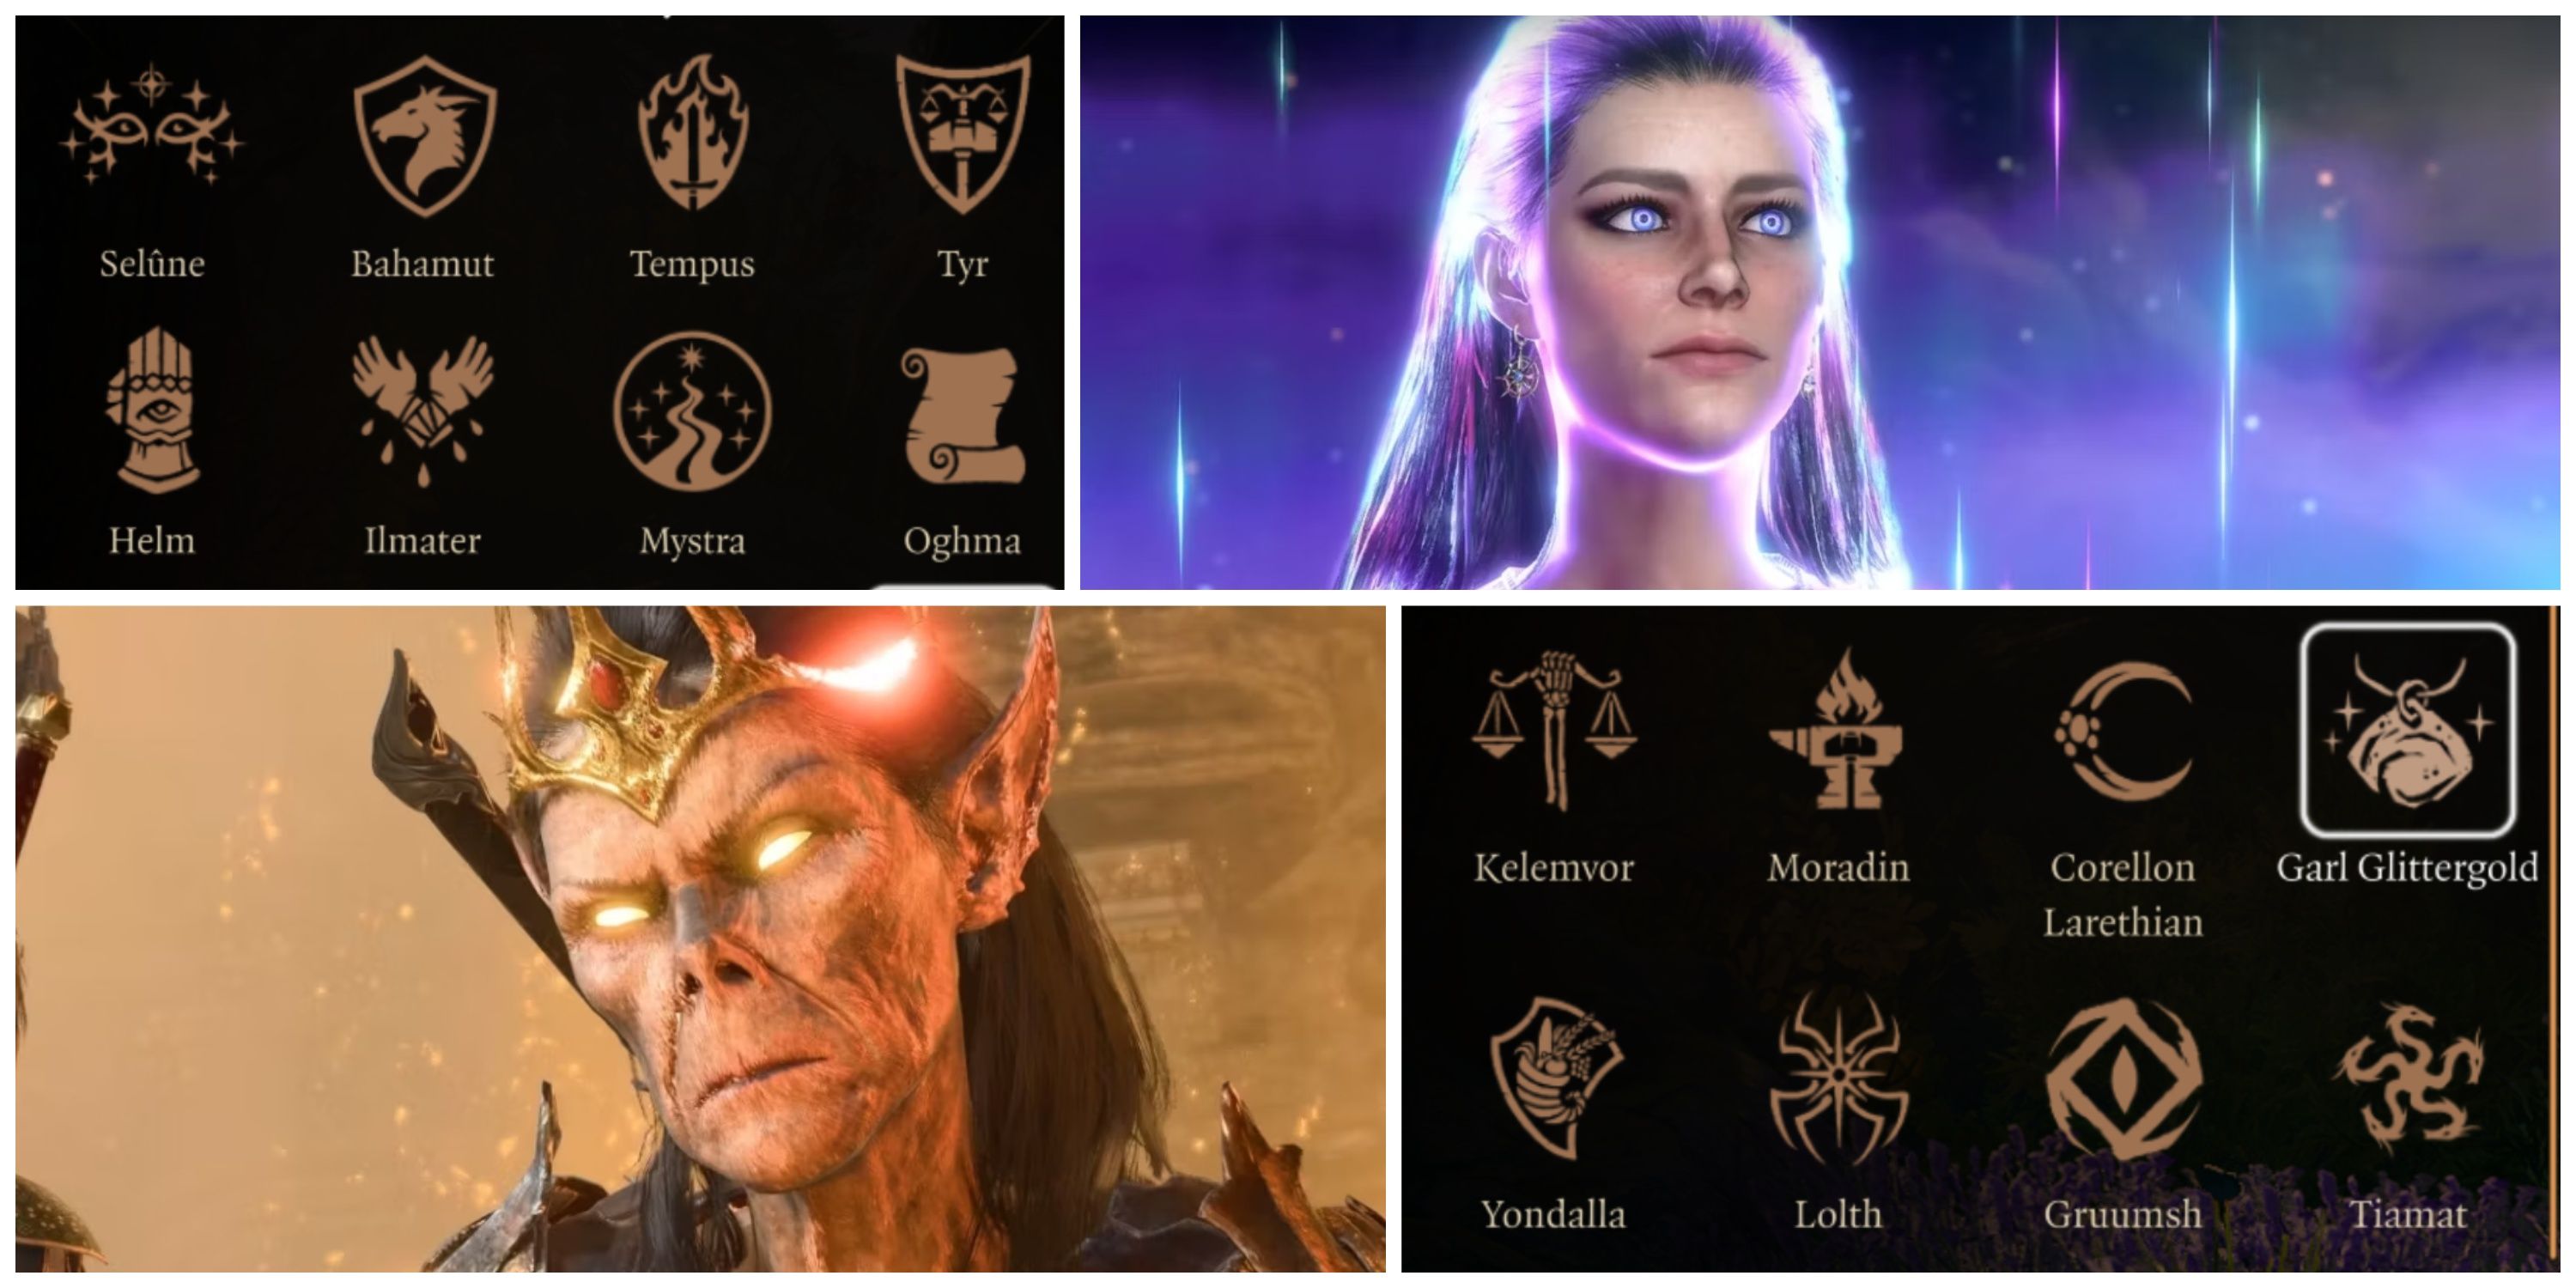 Mystra and Vlaakith, along with the selection screen for cleric deities